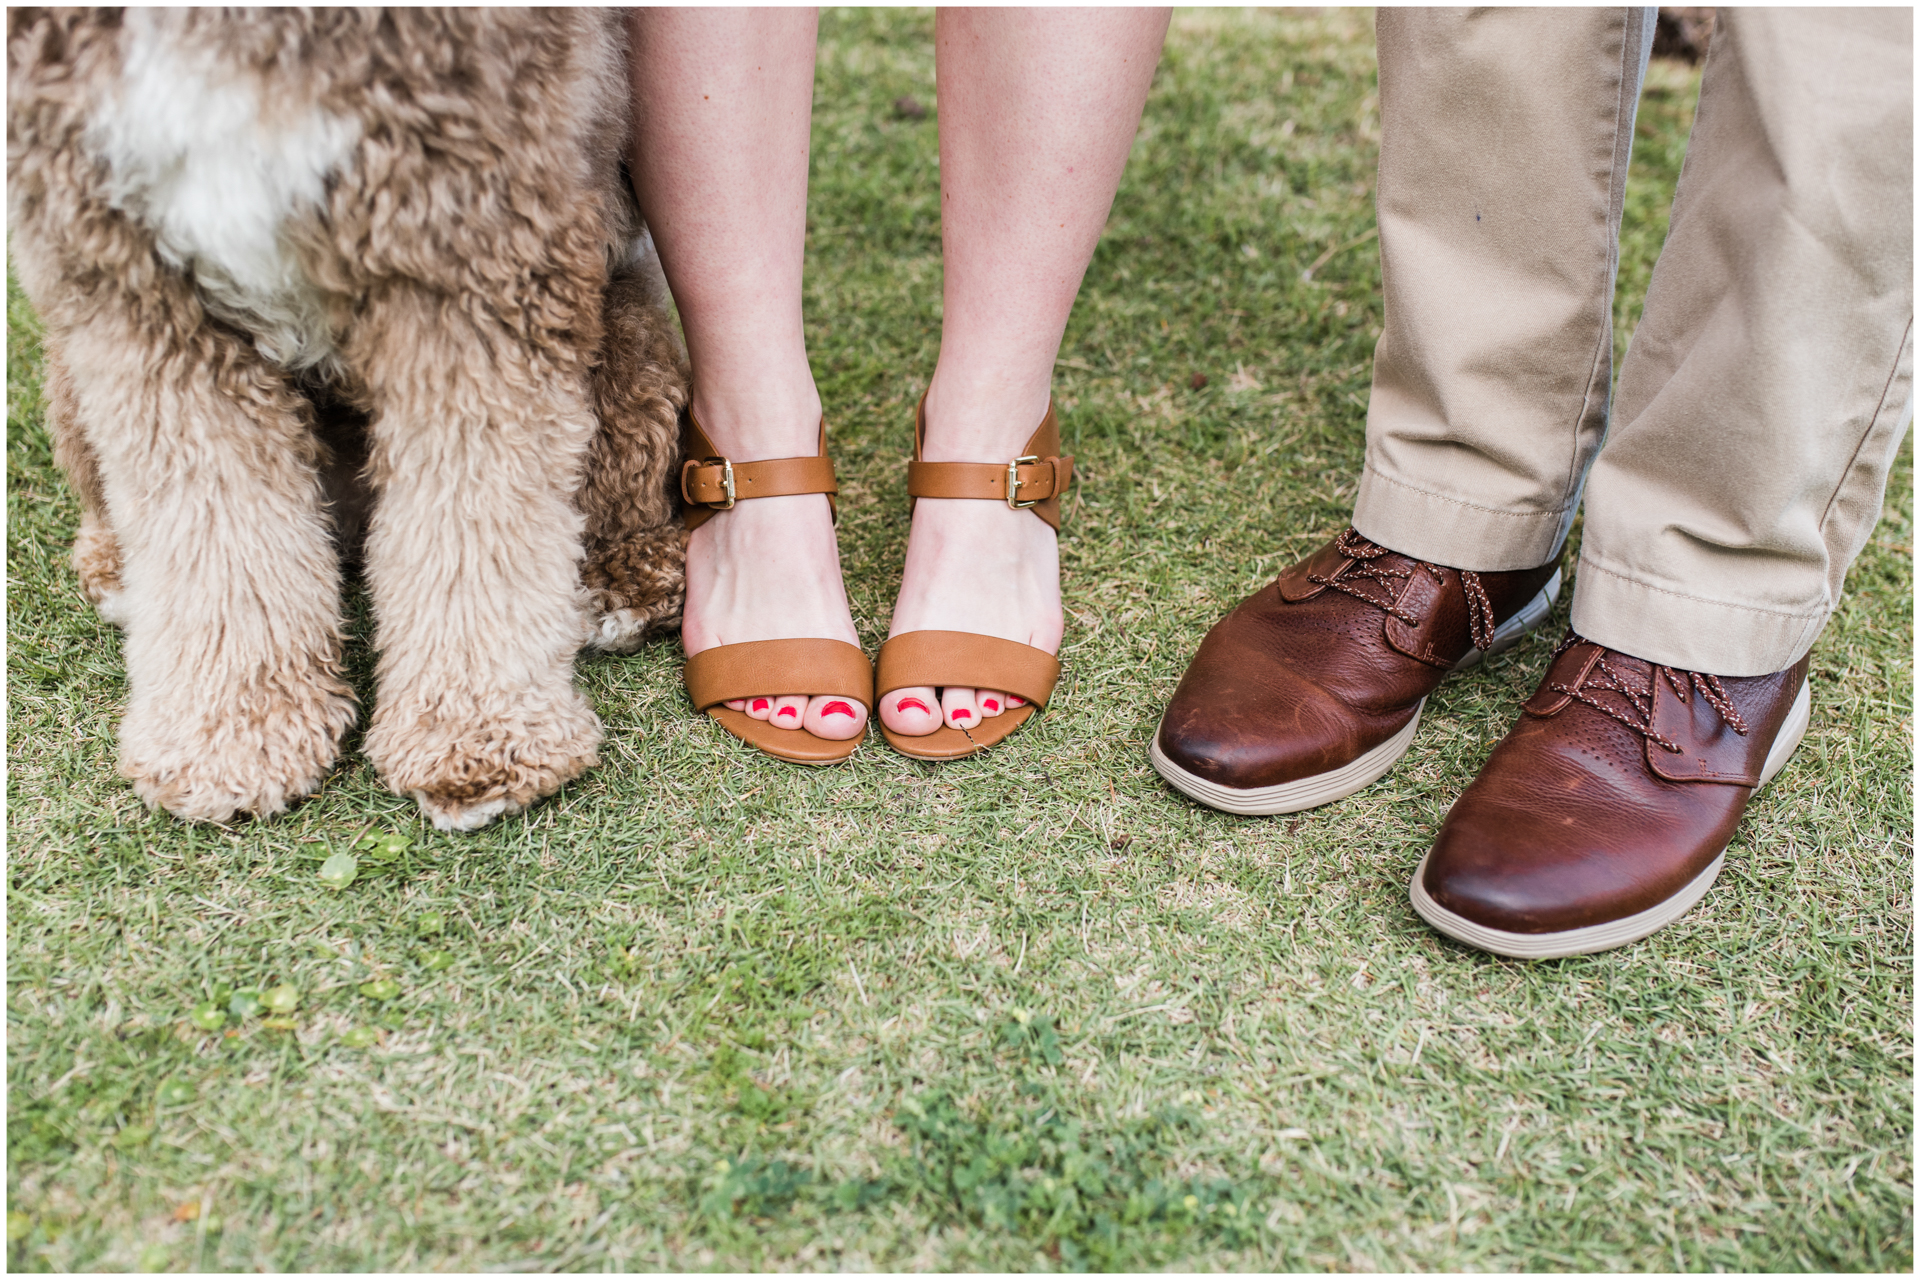 Golden doodle paws with parents feet